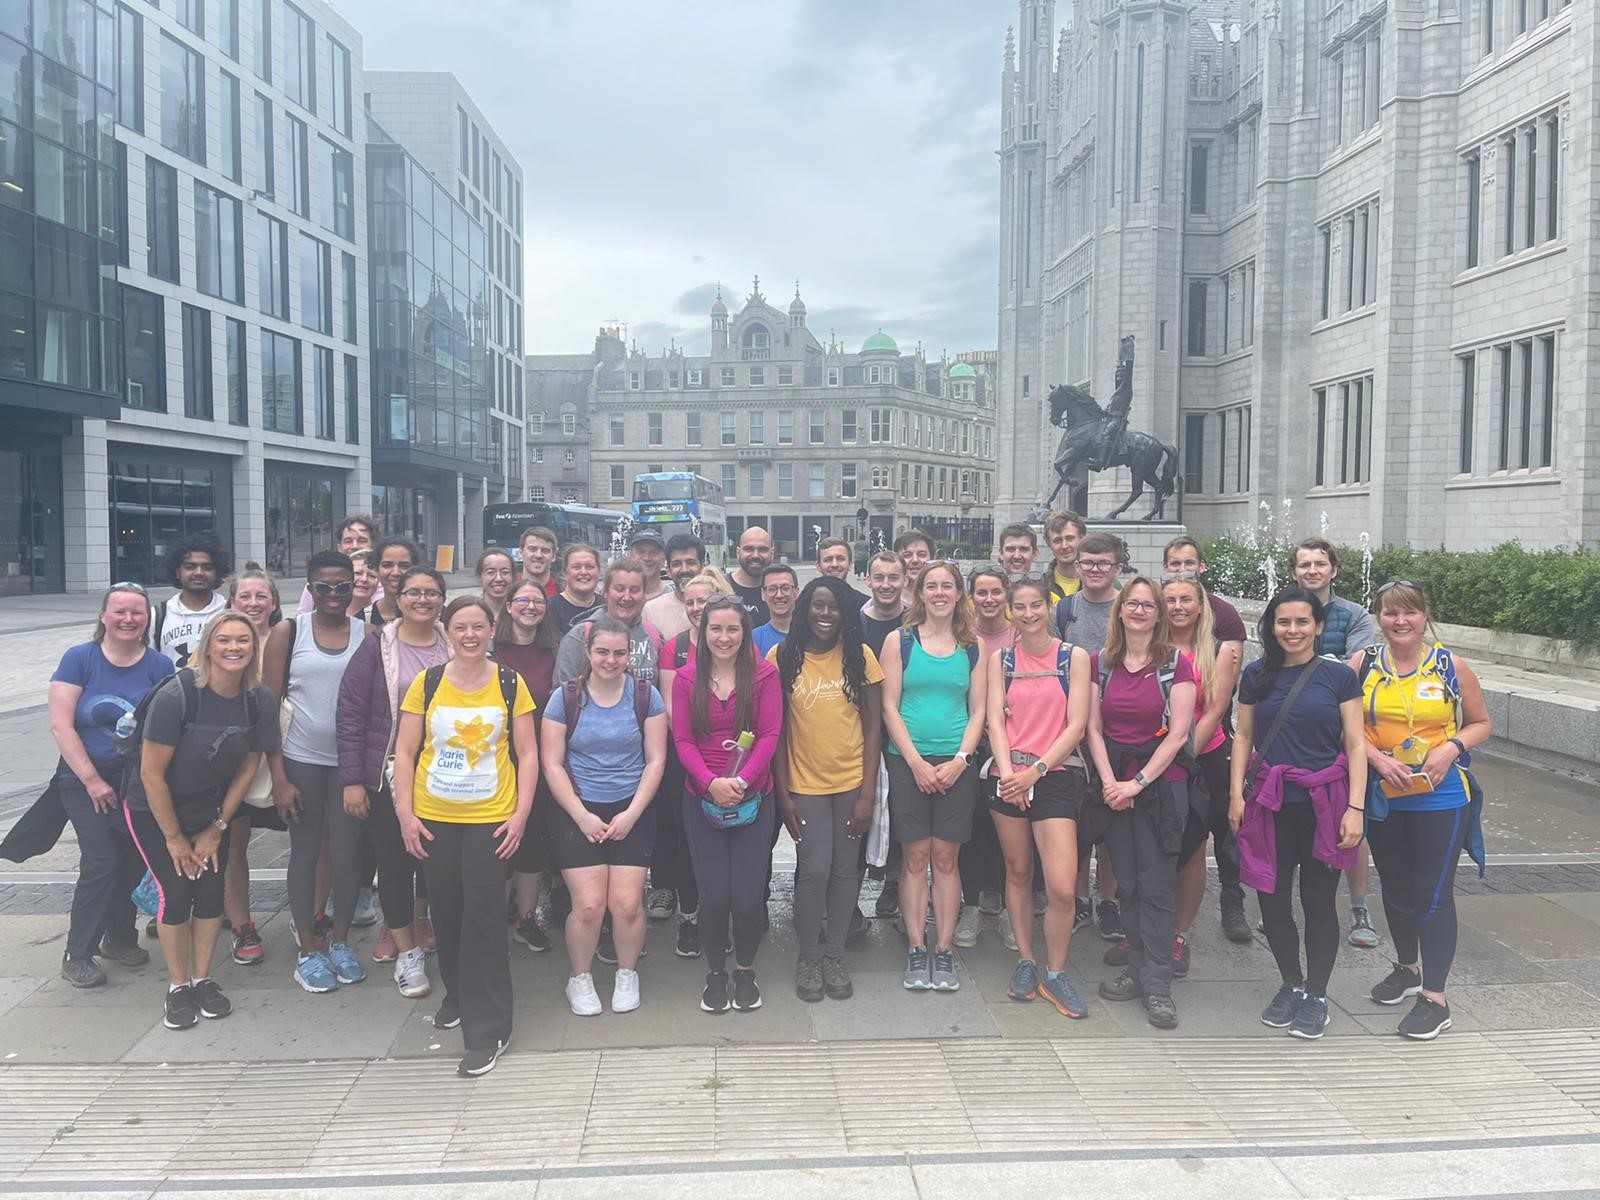 KPMG Scotland colleagues step up for charity partner Marie Curie